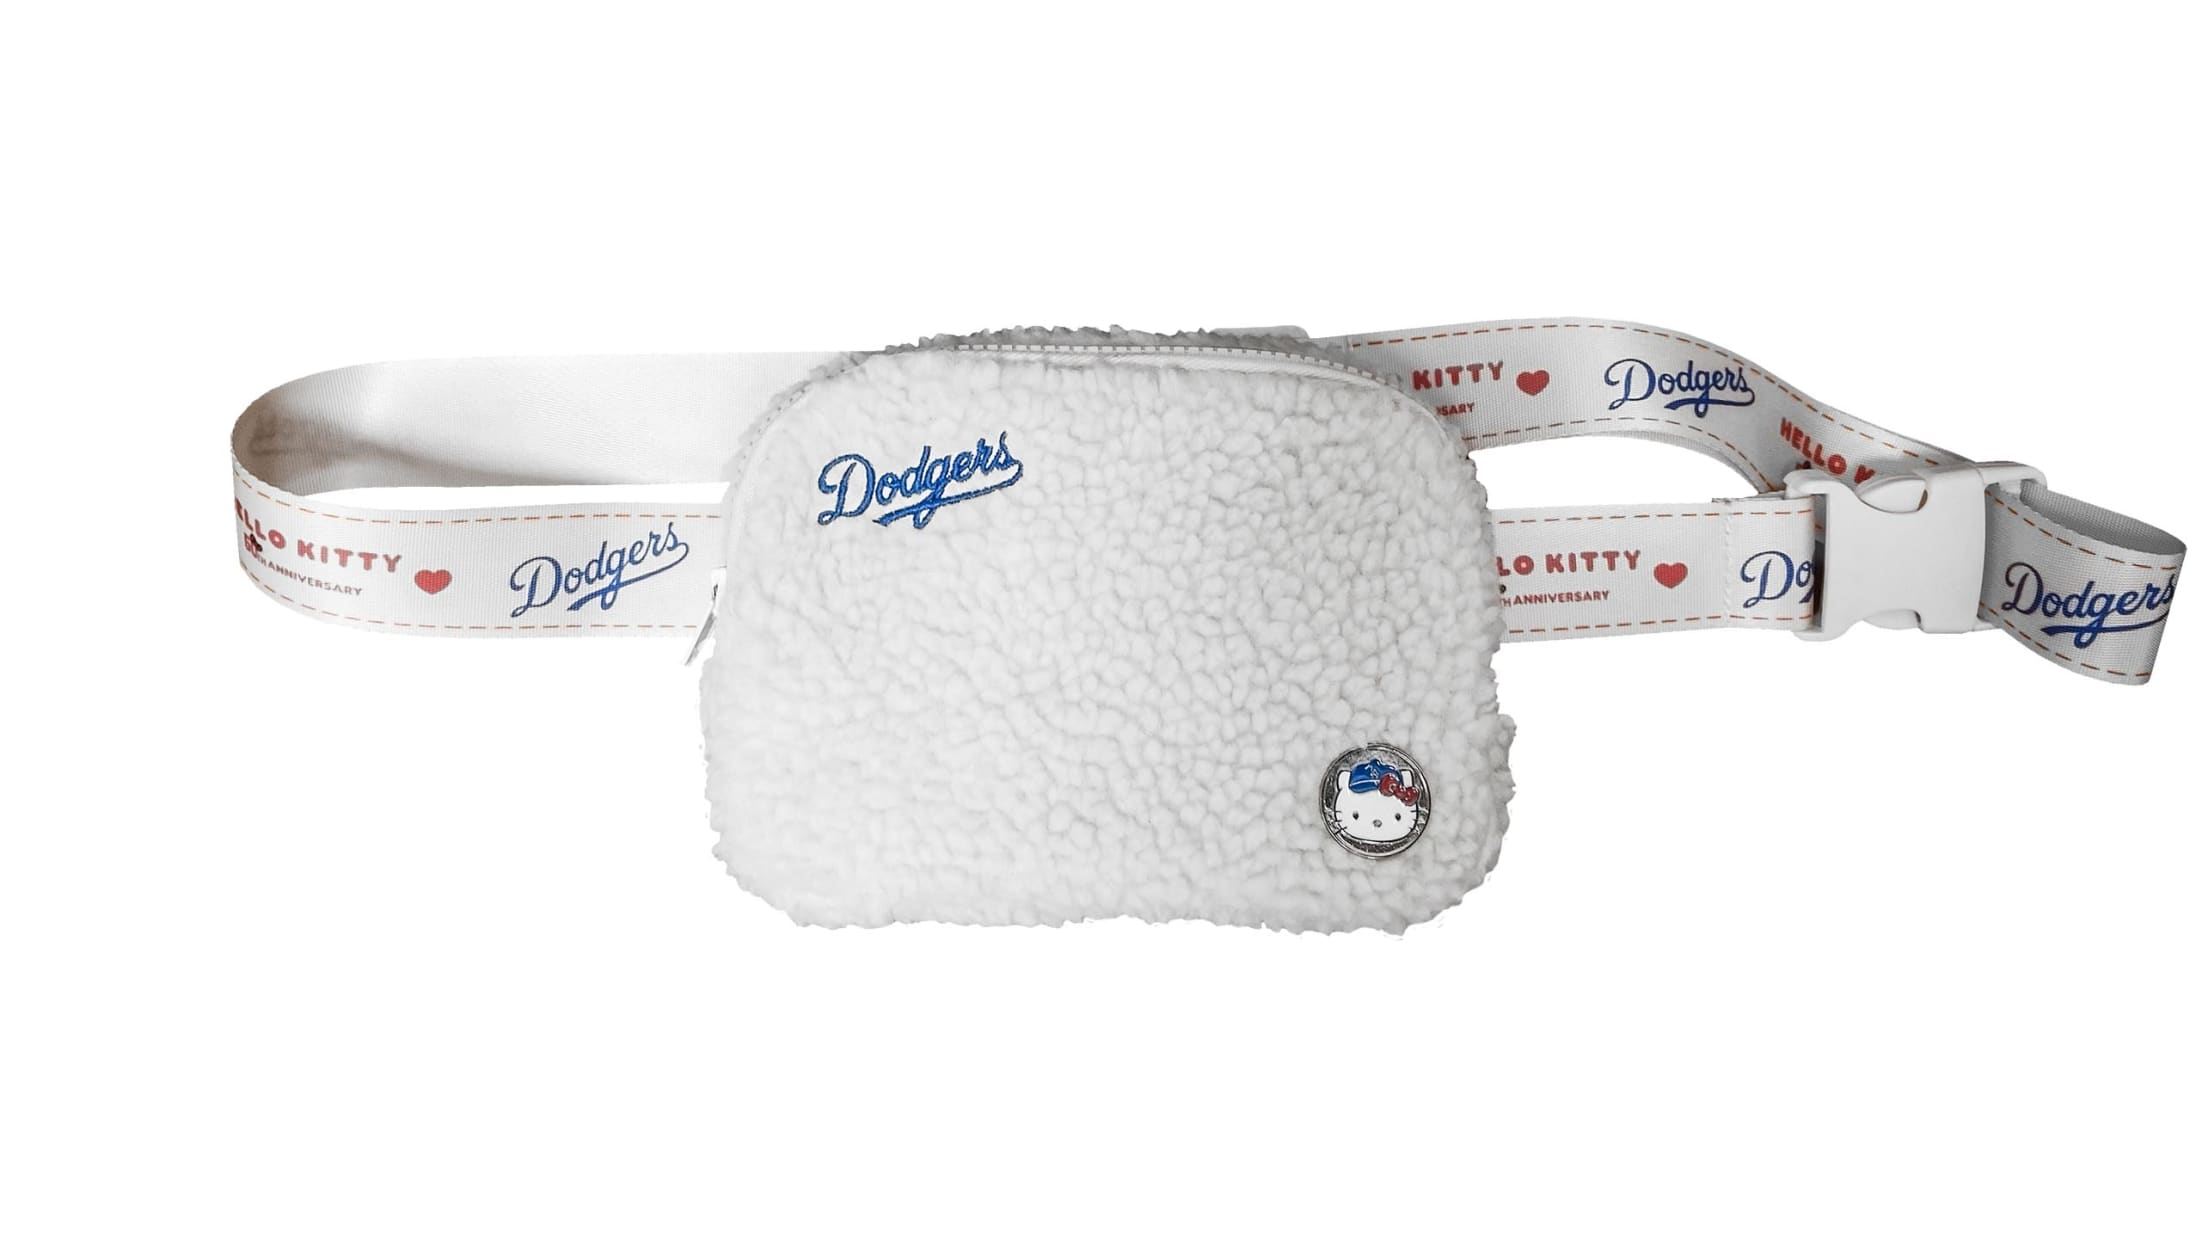 Special Event Ticket Packages | Los Angeles Dodgers